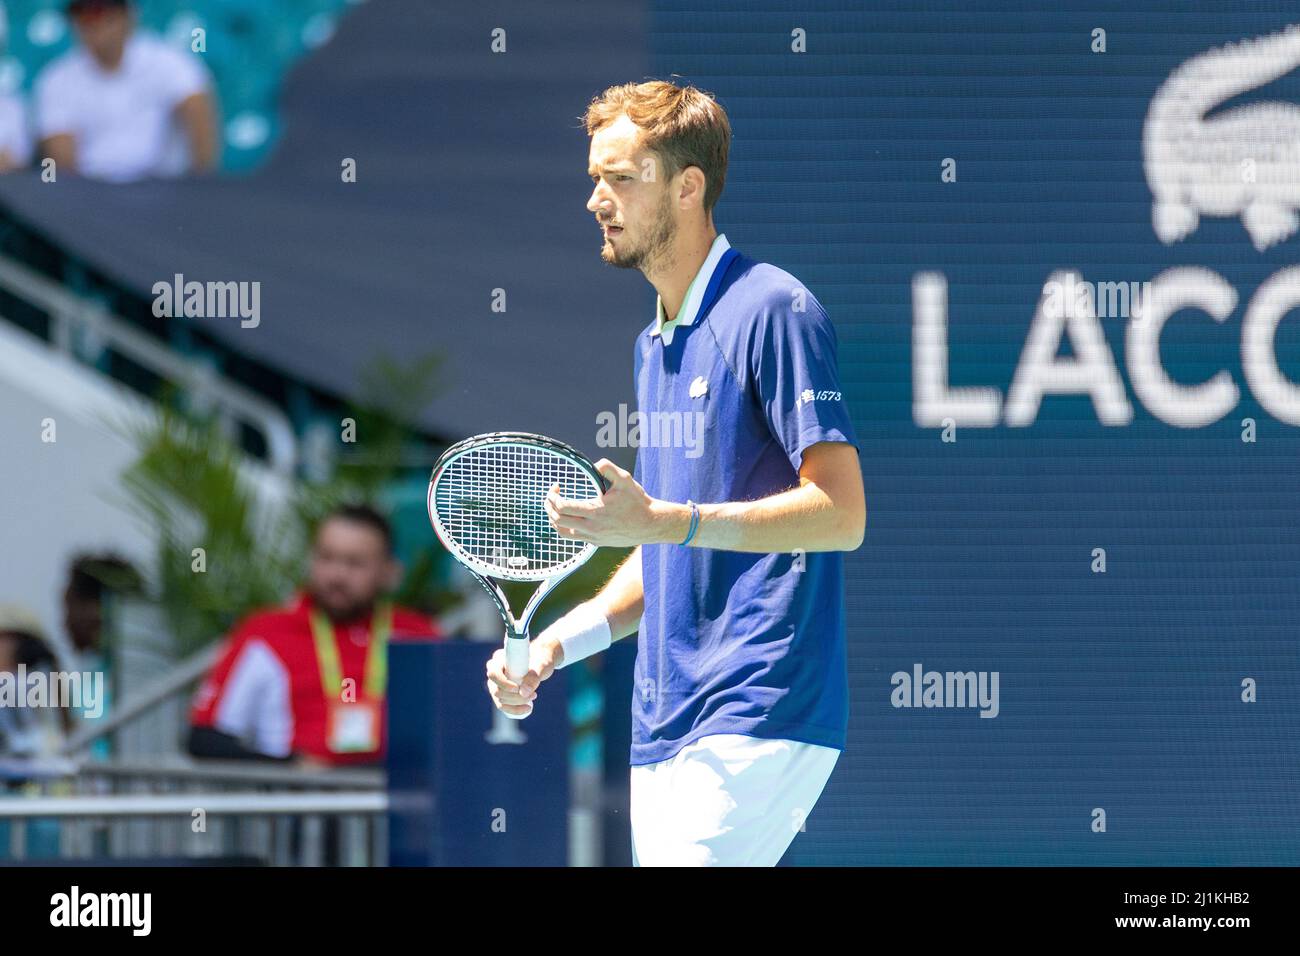 Miami Gardens, FL, USA. 26th March 2022. Andy Murray (GBR) vs Daniil Medvedev (RUS) during the world tennis tournament at the 2022 Miami Open powered by Itau